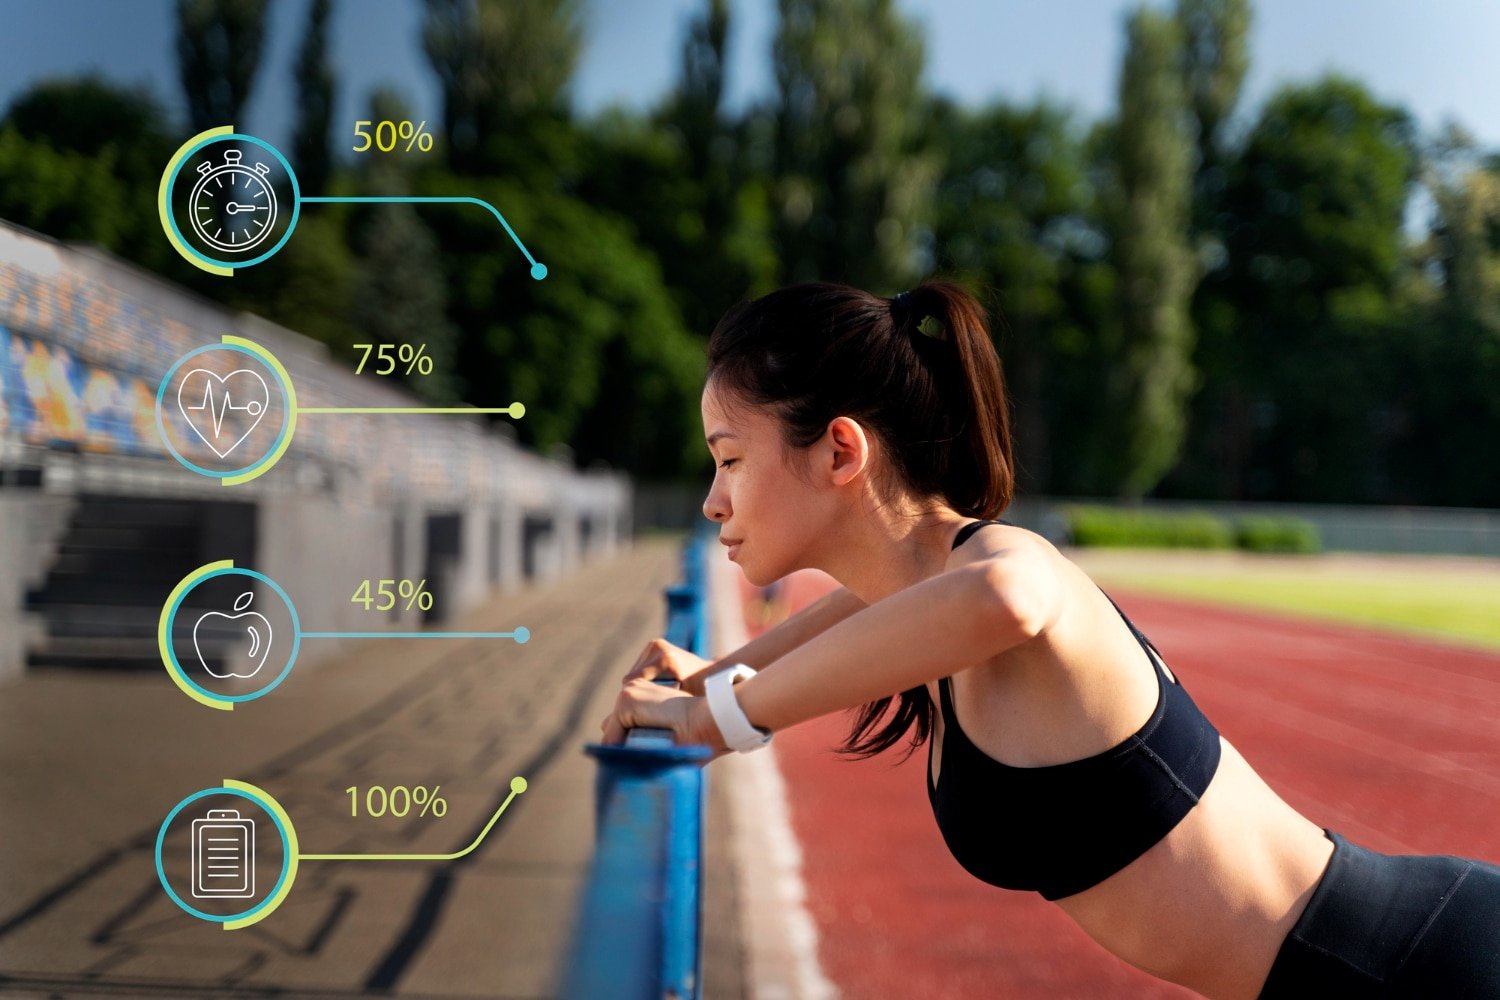 Monitor Your Health With FitTrack’s Smart Scales And Fitness Trackers